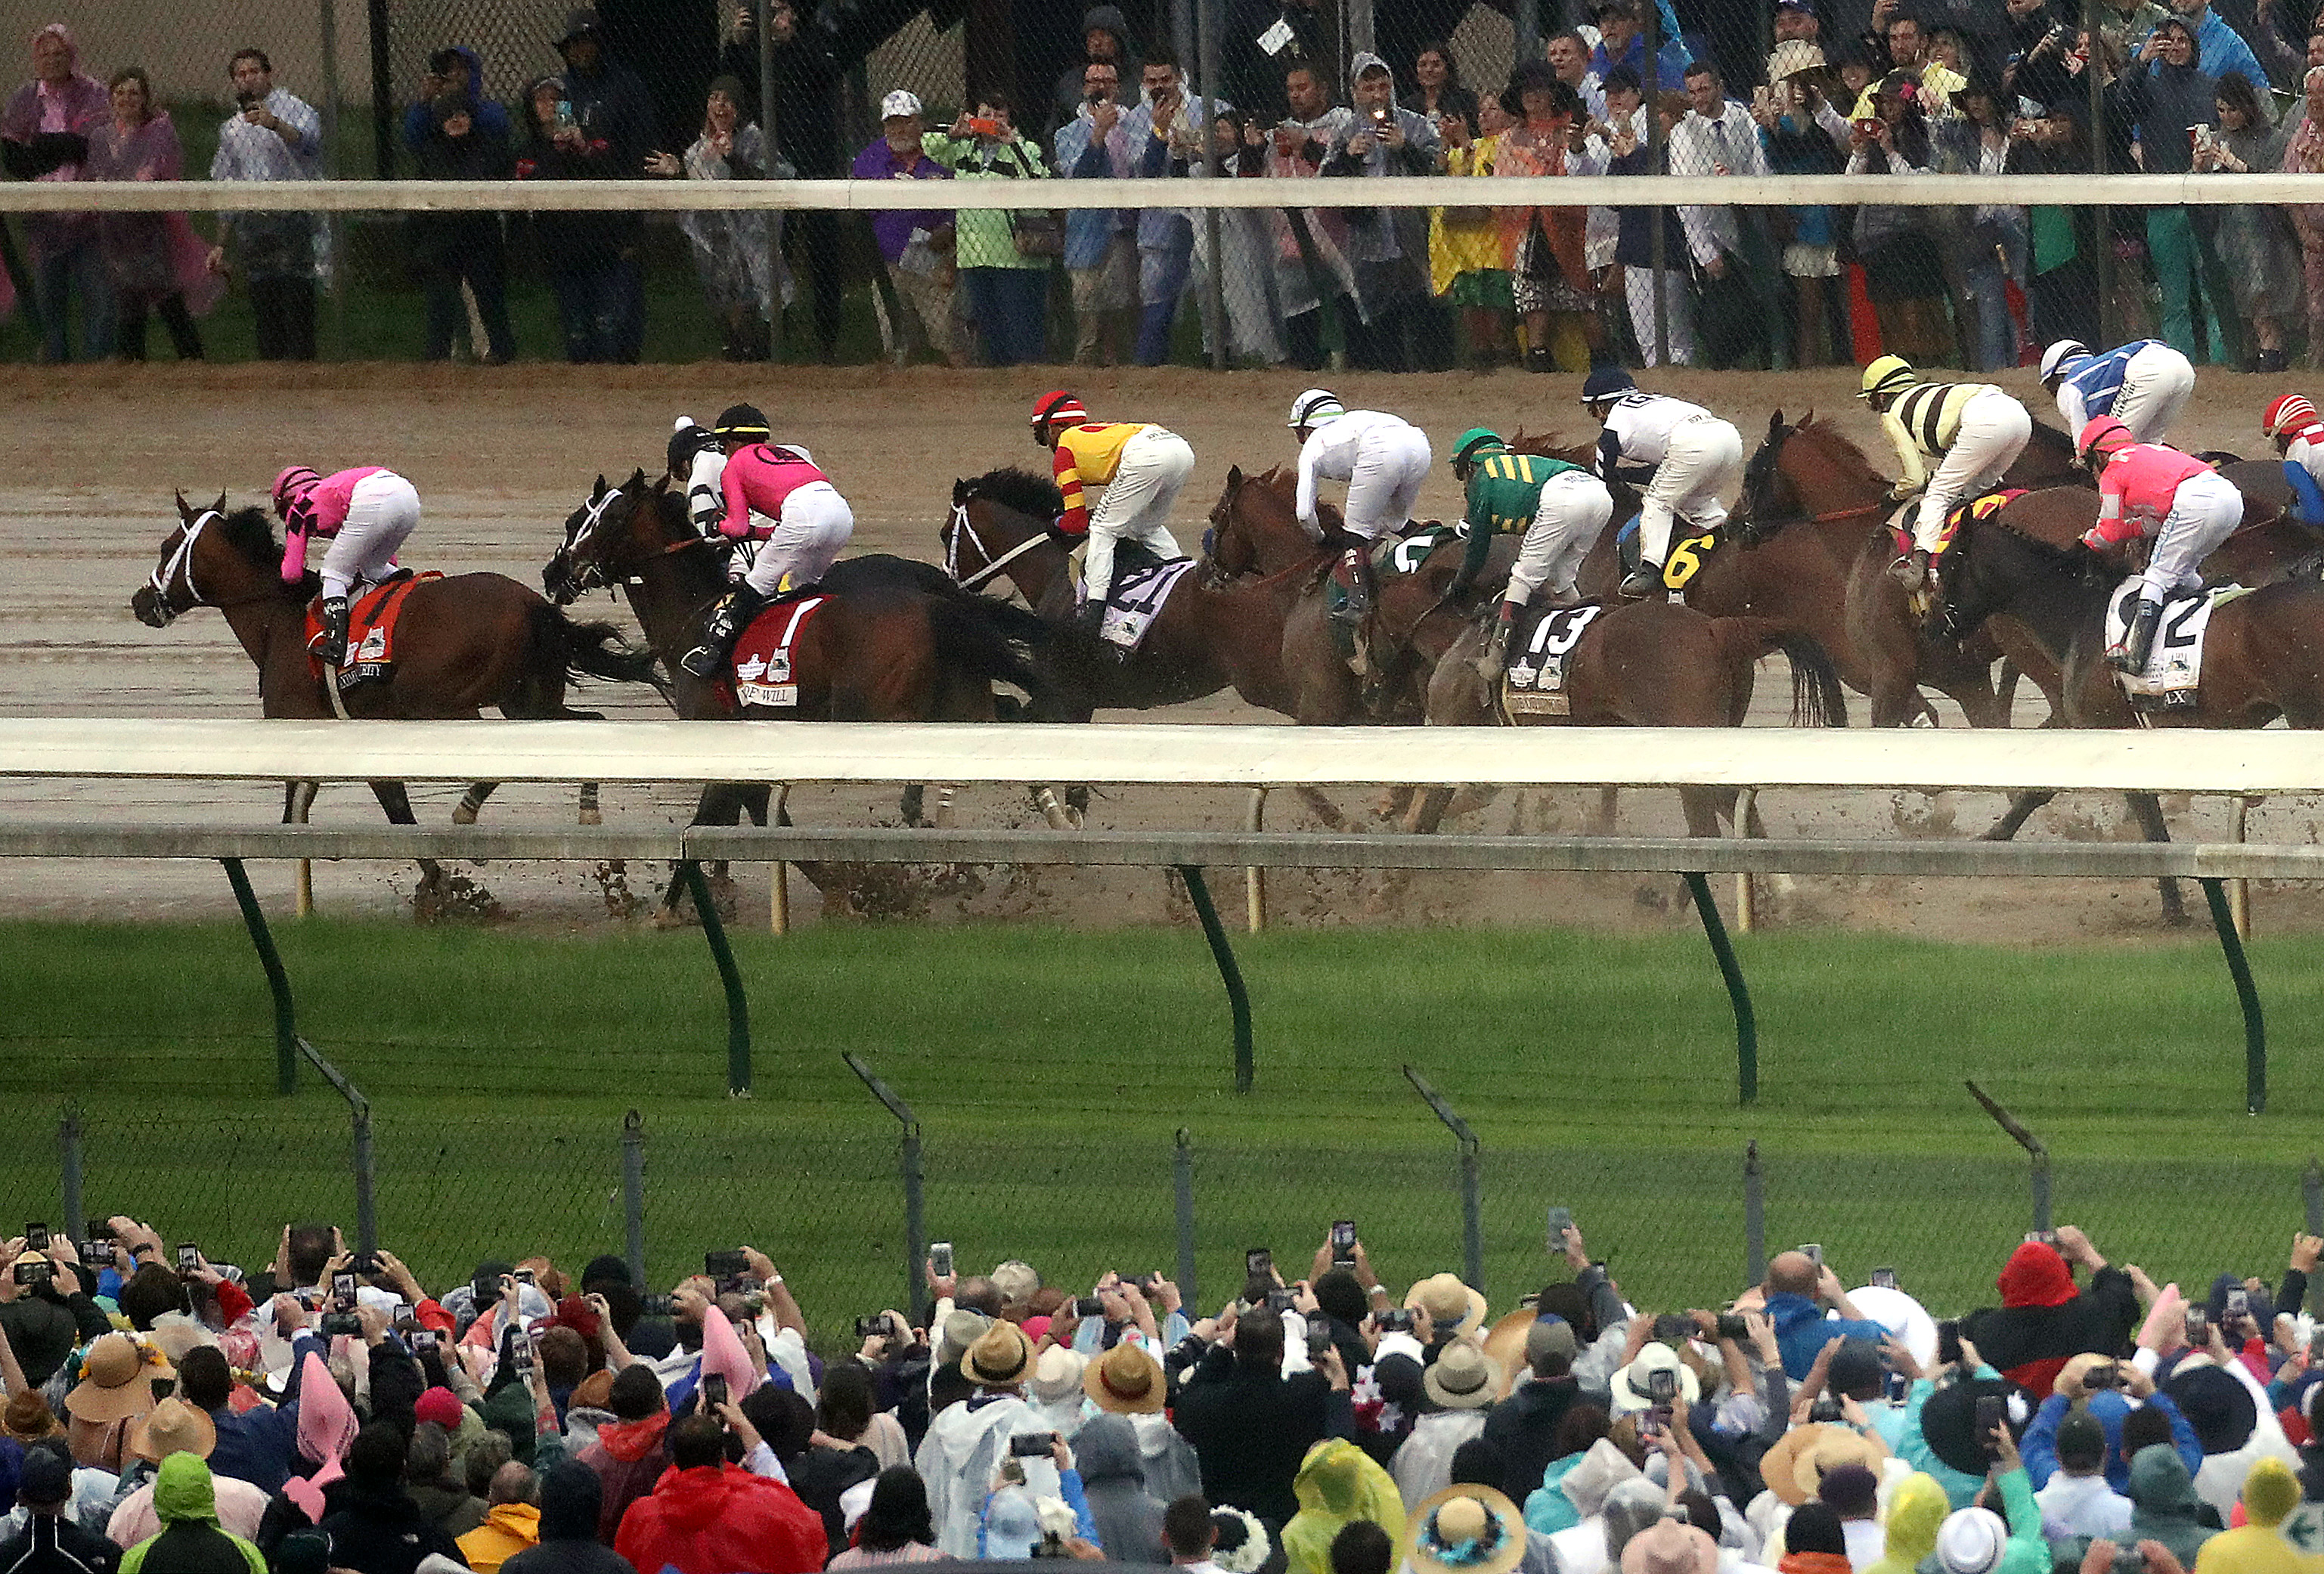 Will Kentucky Derby Have Fans? Race to Draw Biggest Attendance since COVID-19 Pandemic Began